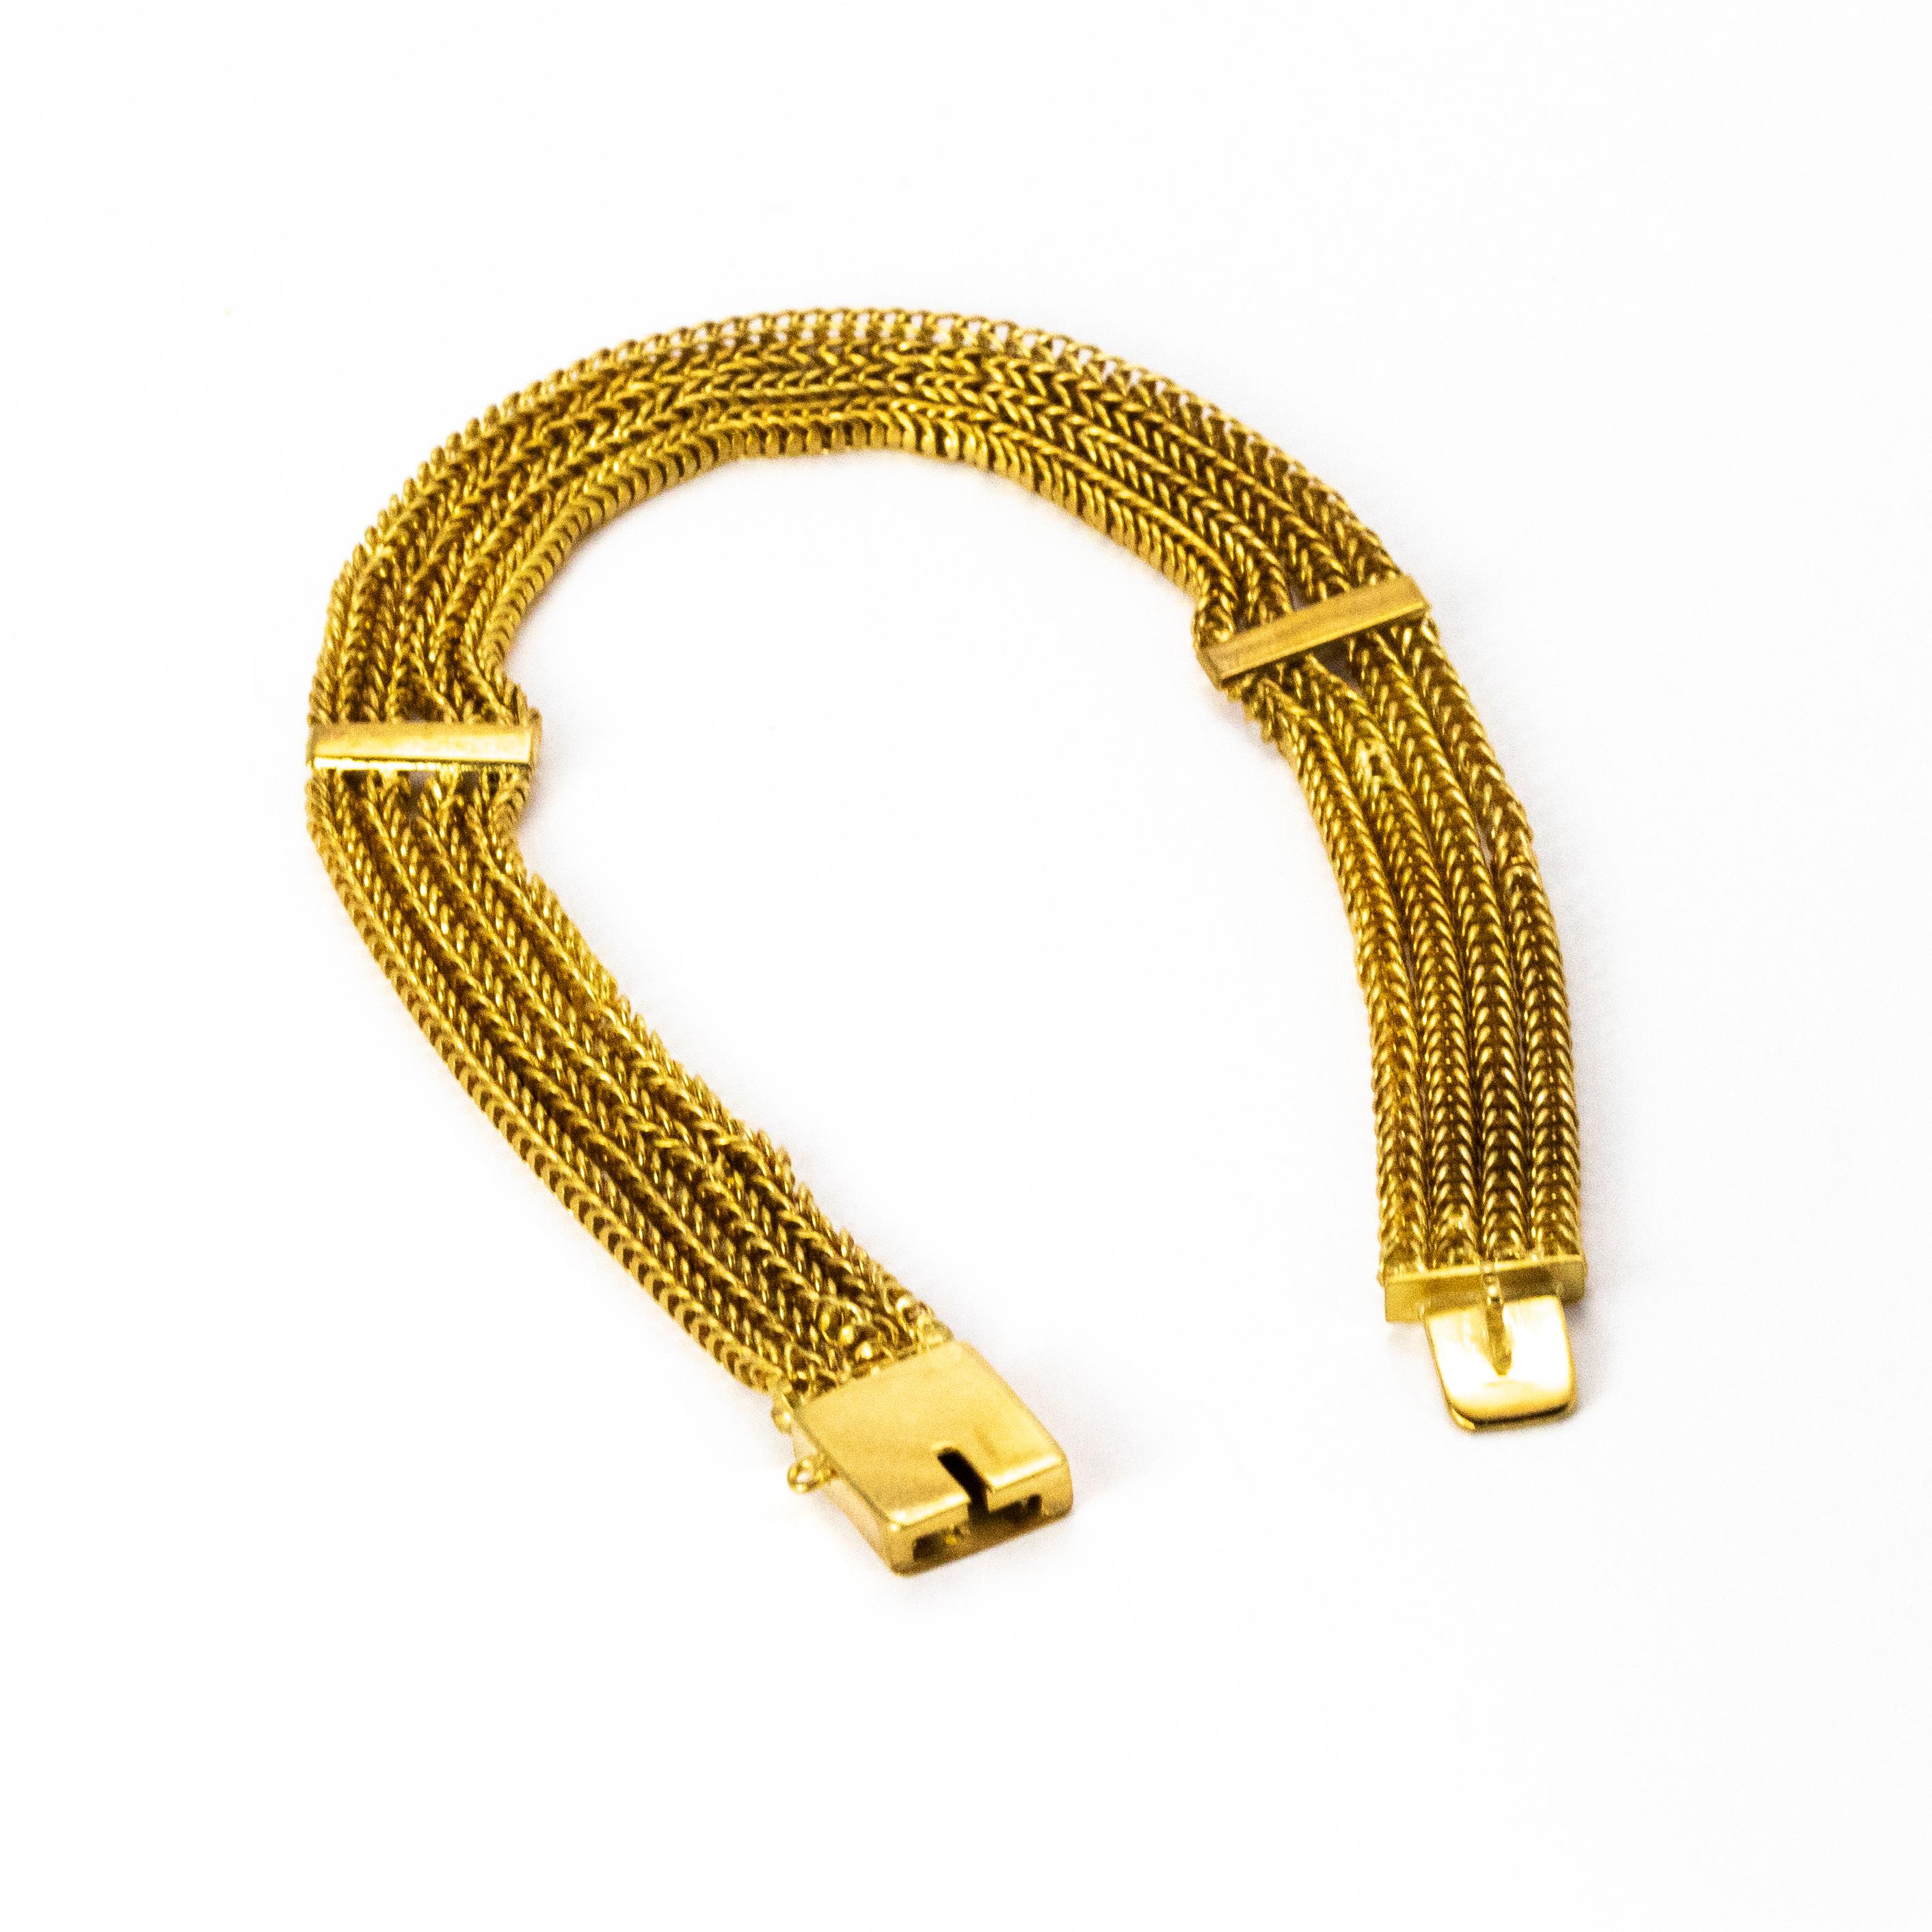 A brilliant Victorian bracelet made up of four tactile 9 karat yellow gold chains, with two bar spacers and  clip fastener.

Bracelet length: 20 cm (when open)